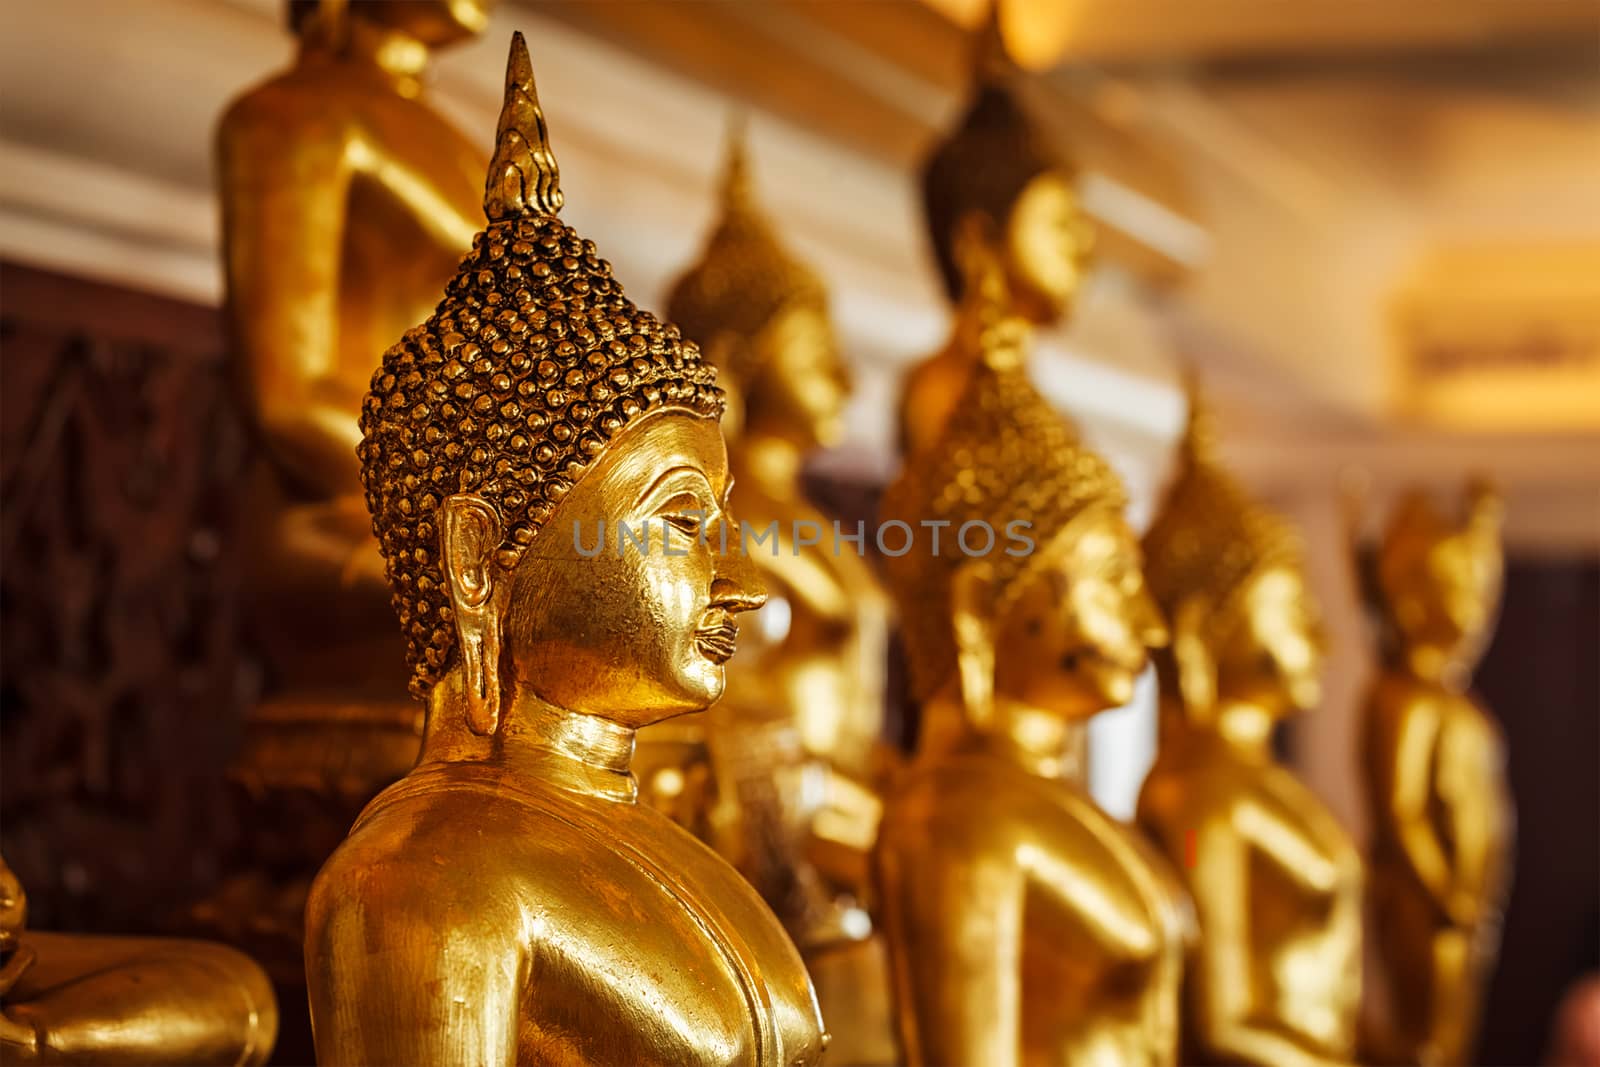 Golden Buddha statues in buddhist temple by dimol